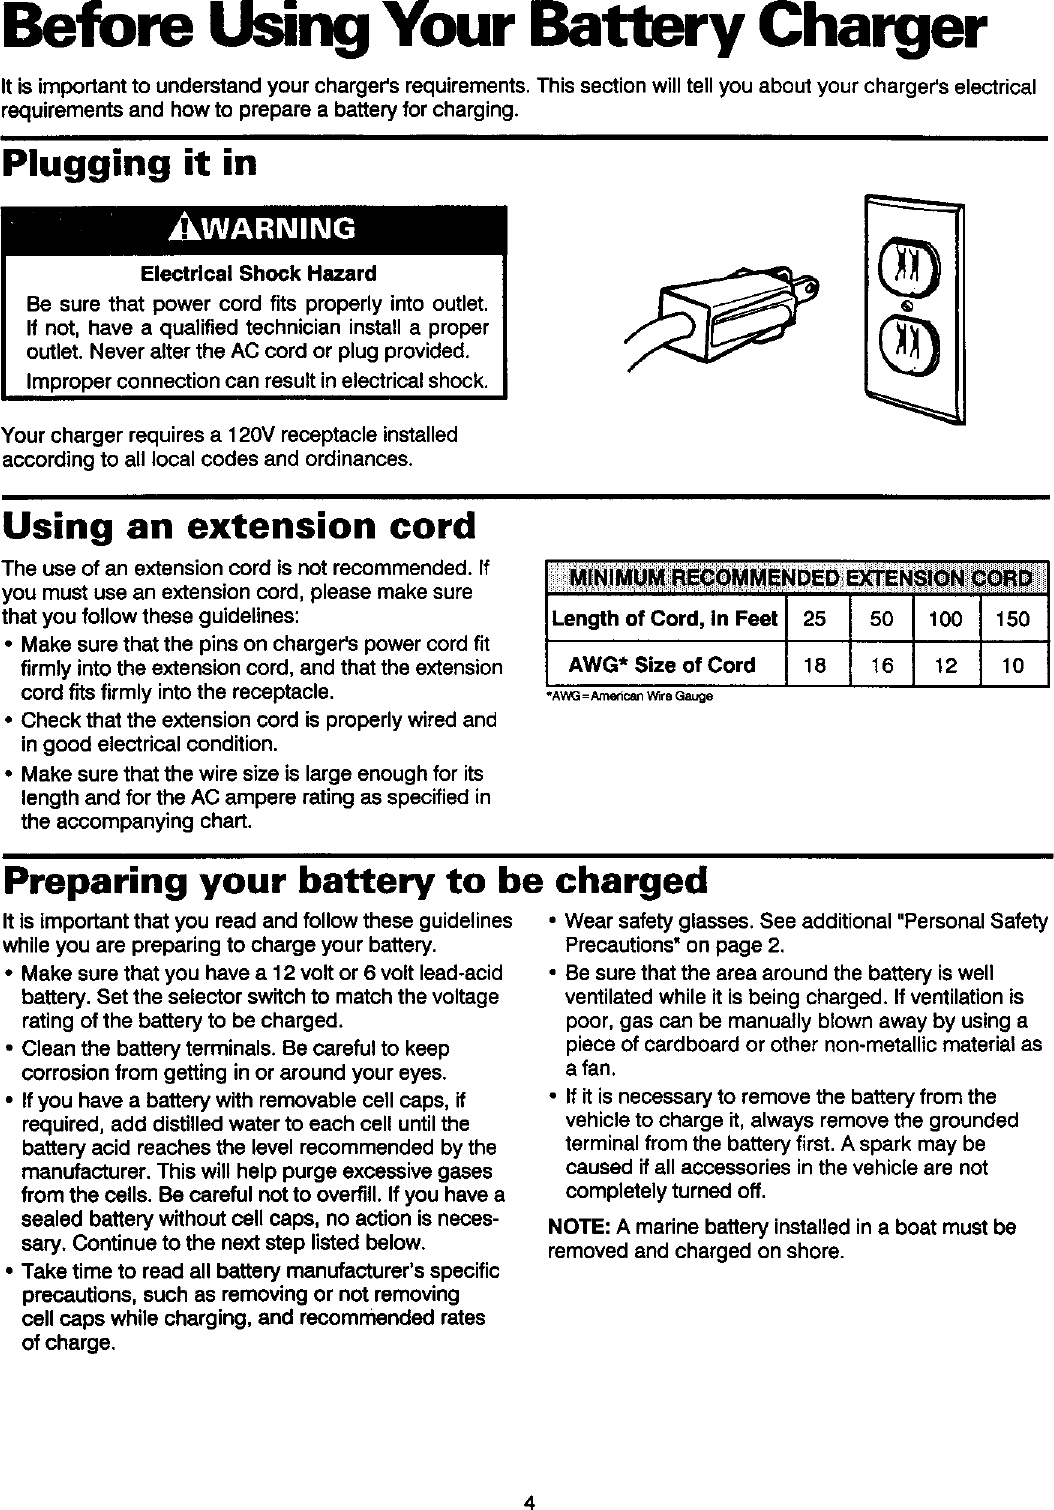 Die Hard Battery Size Chart